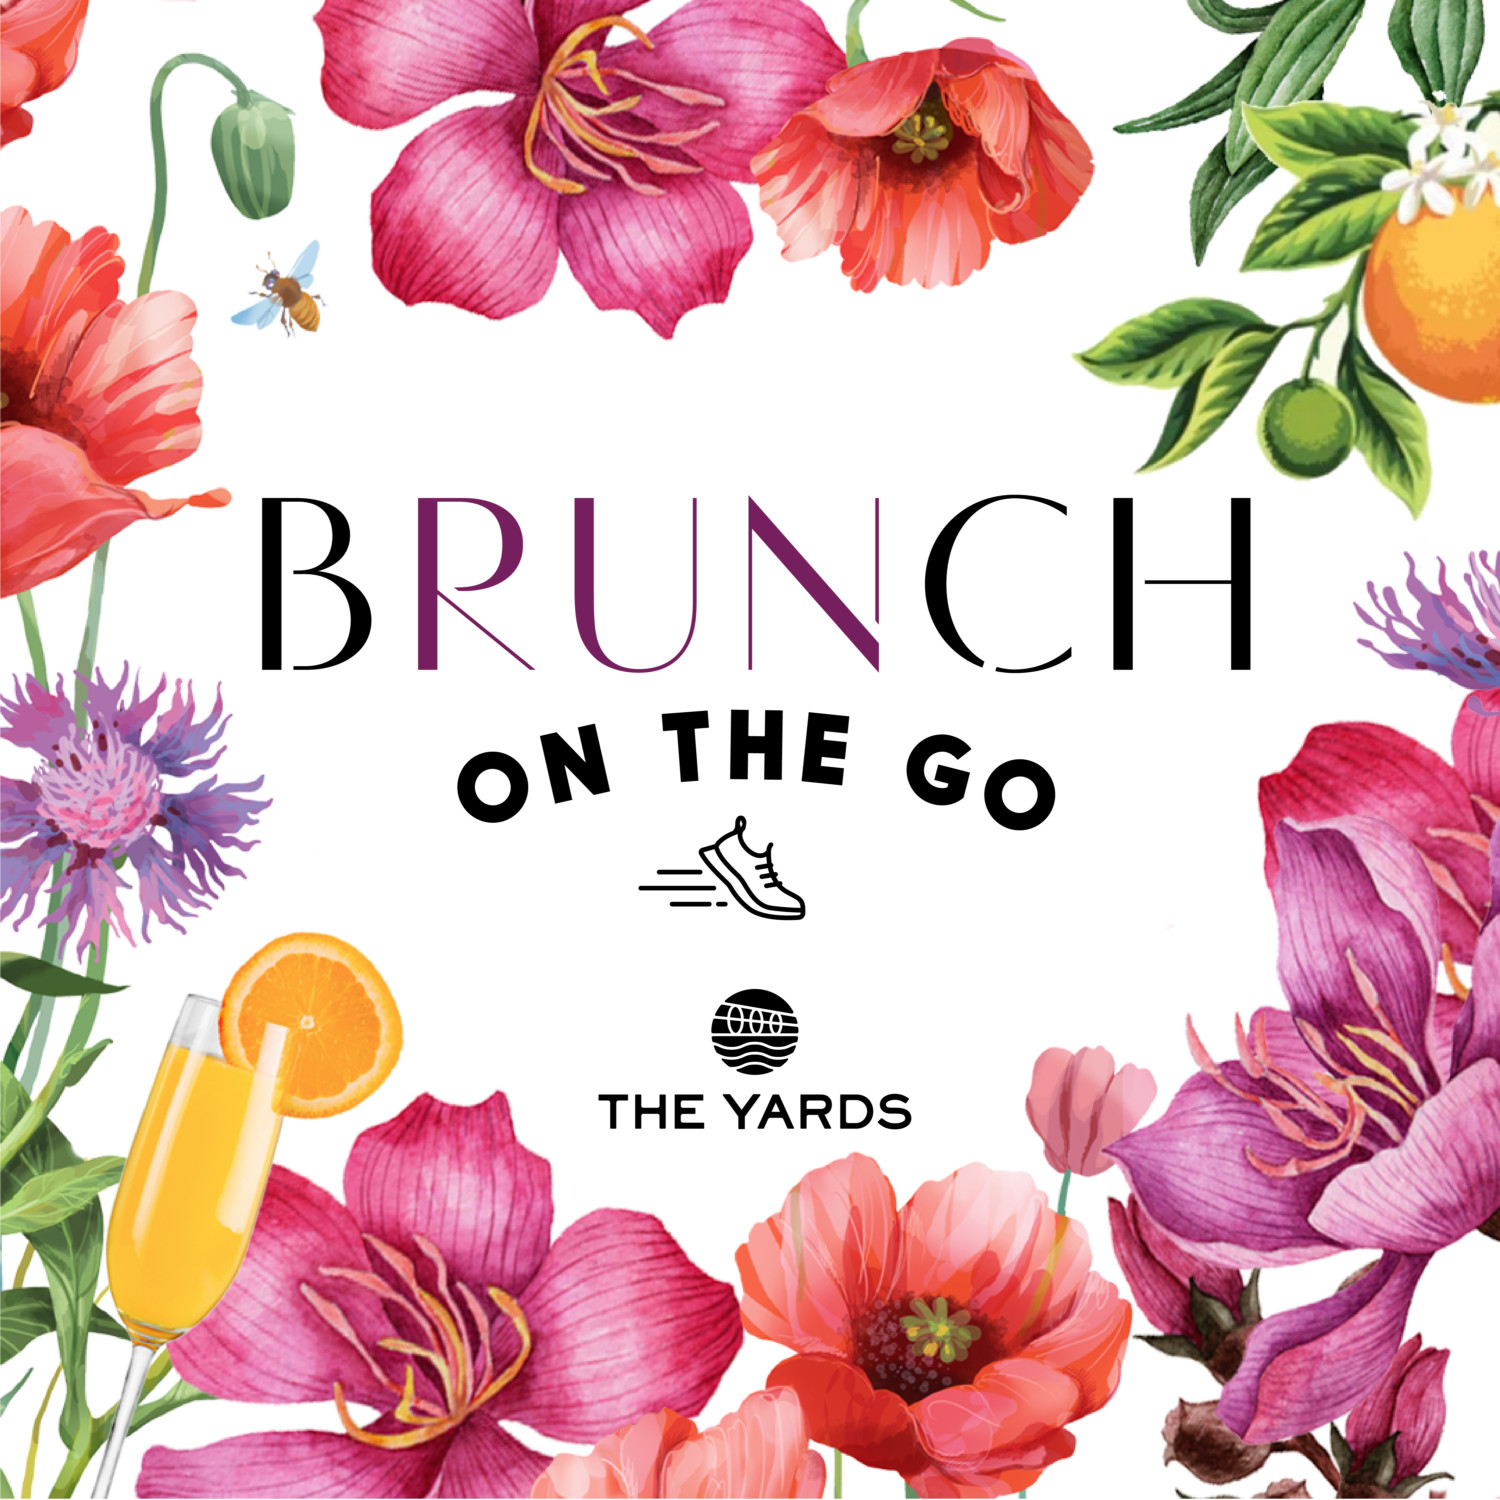 Brunch on the Go with The Yards